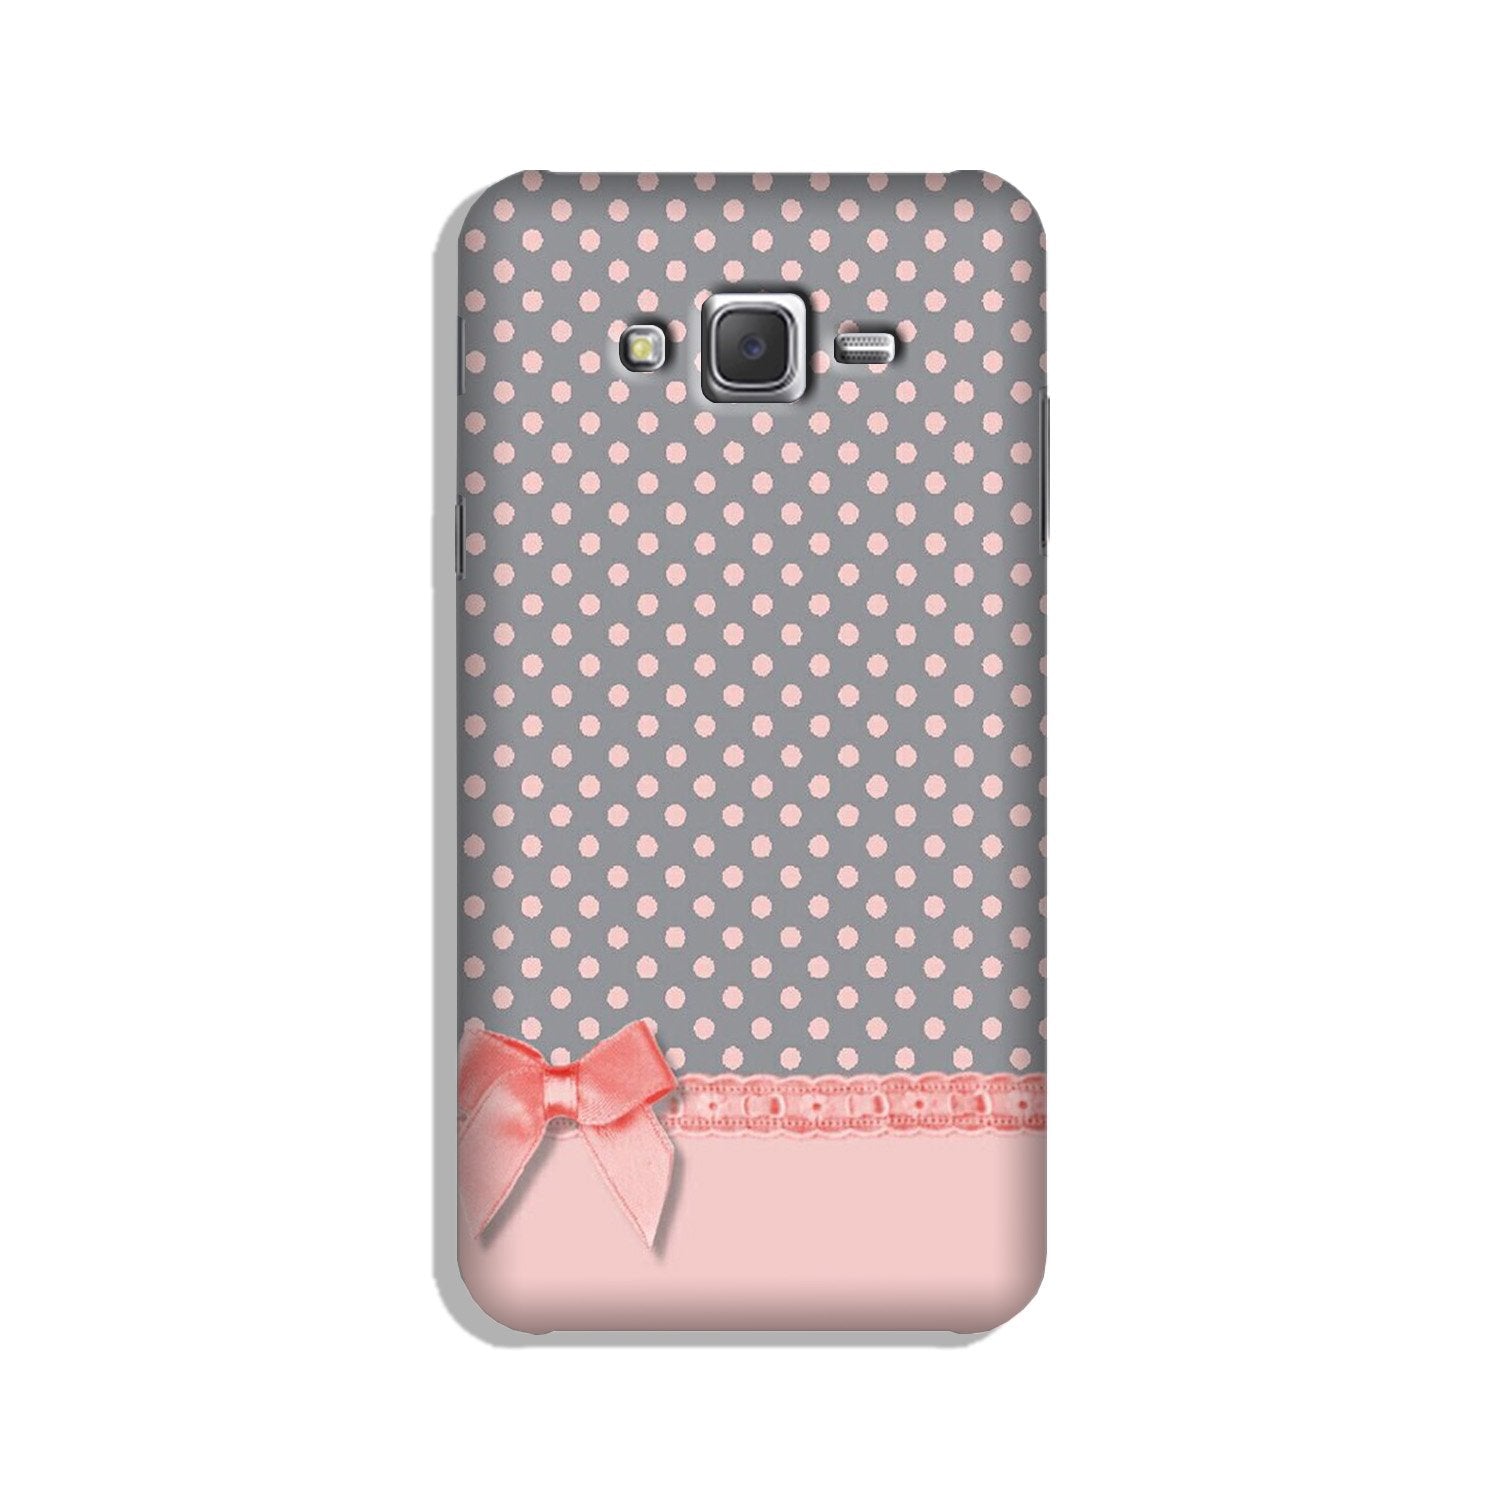 Gift Wrap2 Case for Galaxy J2 (2015)